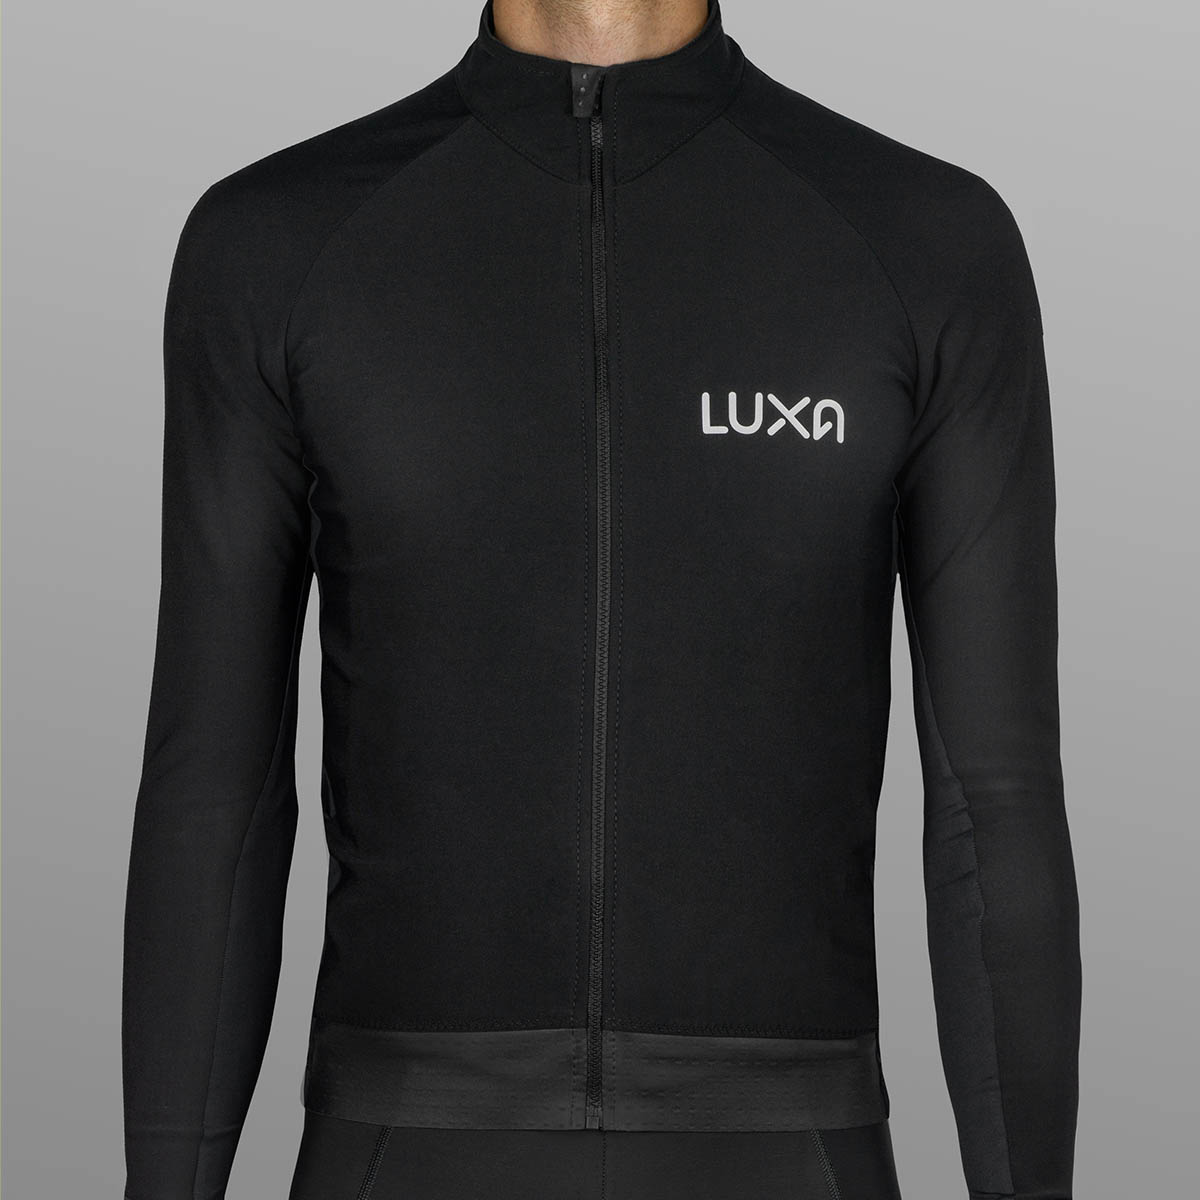 autumn insulated black long sleeve jersey for chill rides made in Poland by Luxa